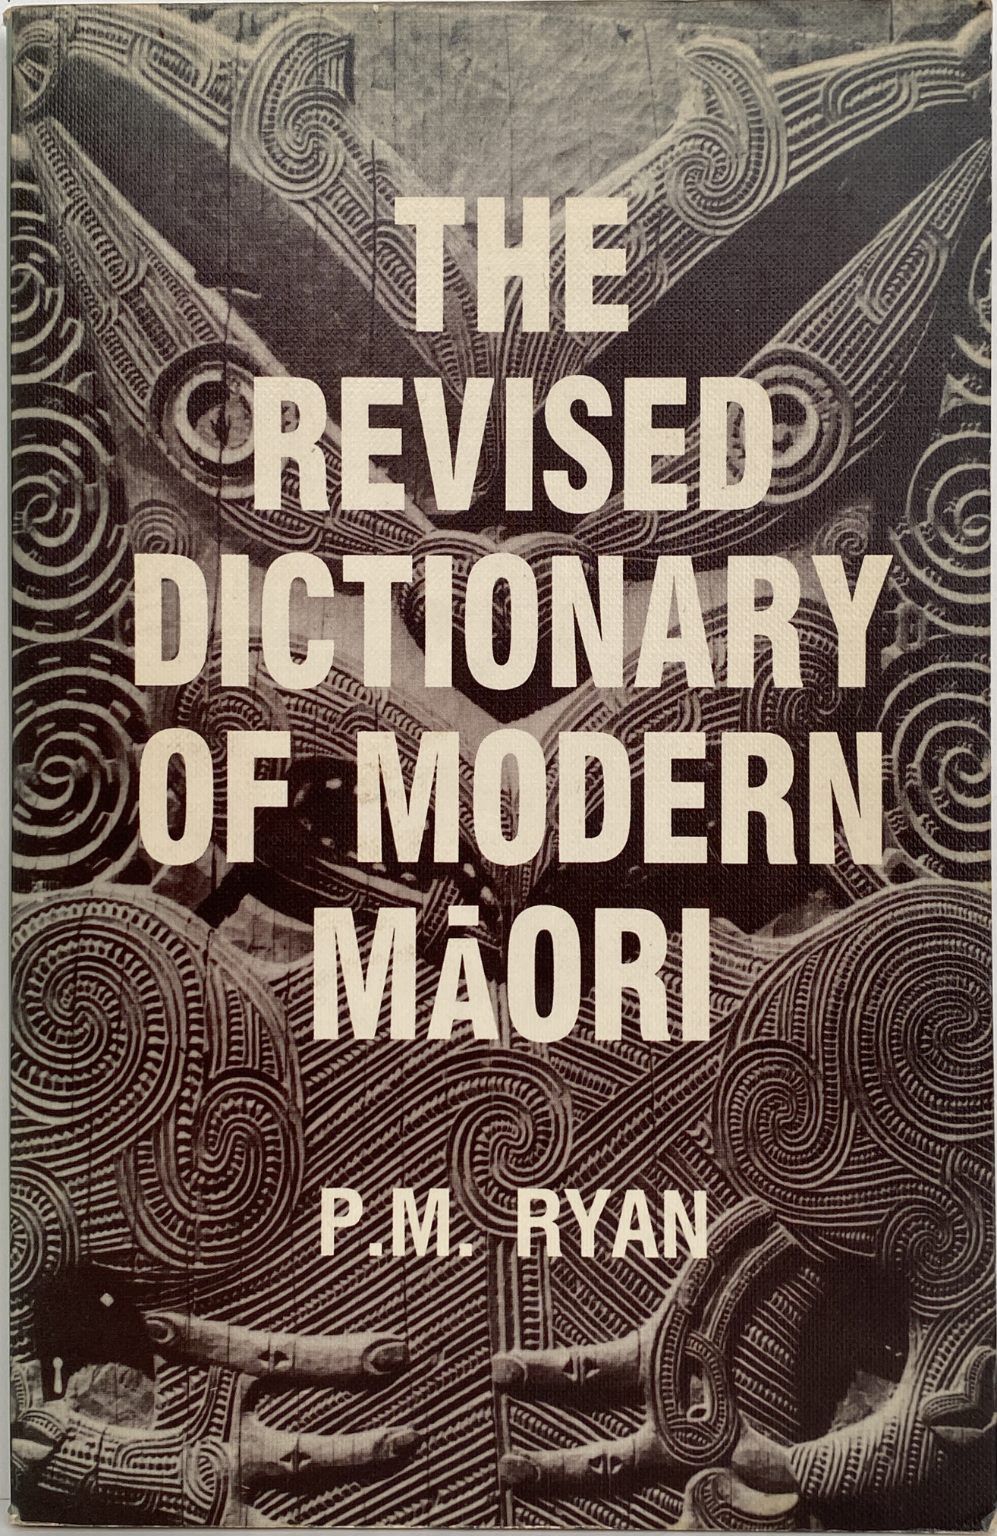 THE REVISED DICTIONARY OF MODERN MAORI